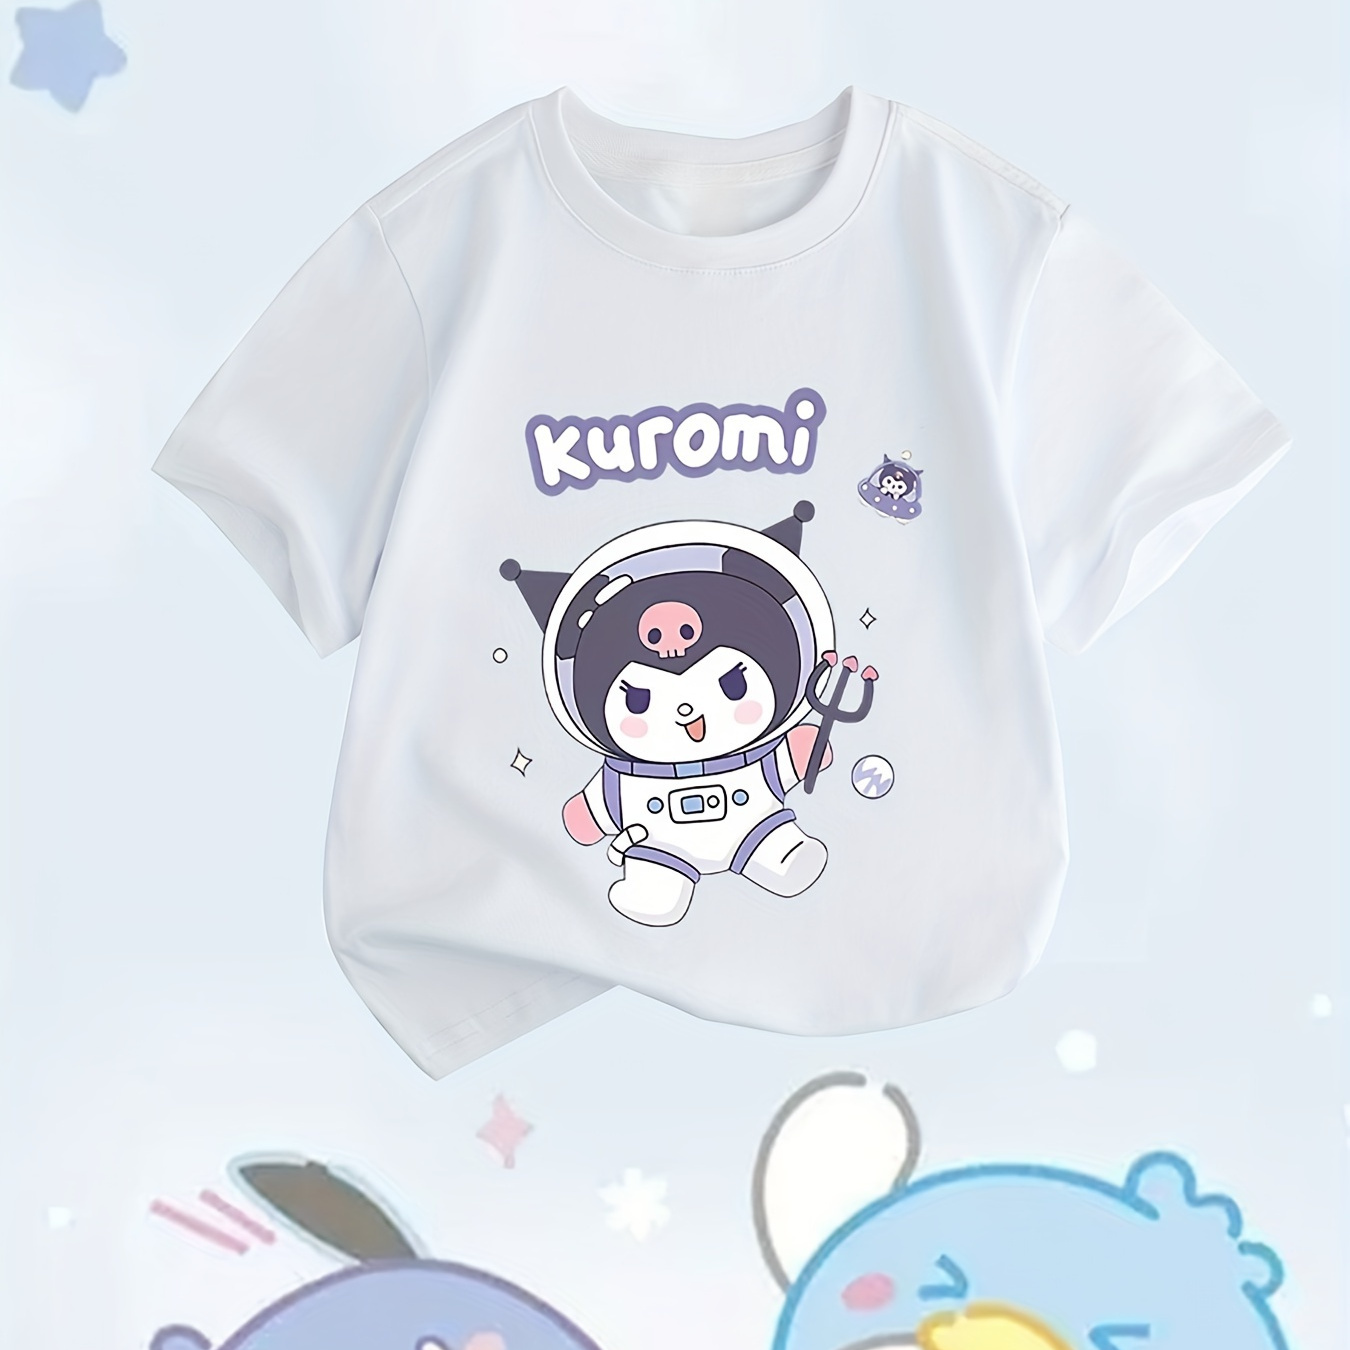 

Cartoon Sanrio Kuromi Graphic Print Tees, Girls' 1pcs/4pcs Casual & Trendy Crew Neck Short Sleeve Cotton T-shirts Set For Spring & Summer, Girls' Clothes For Outdoor Activities